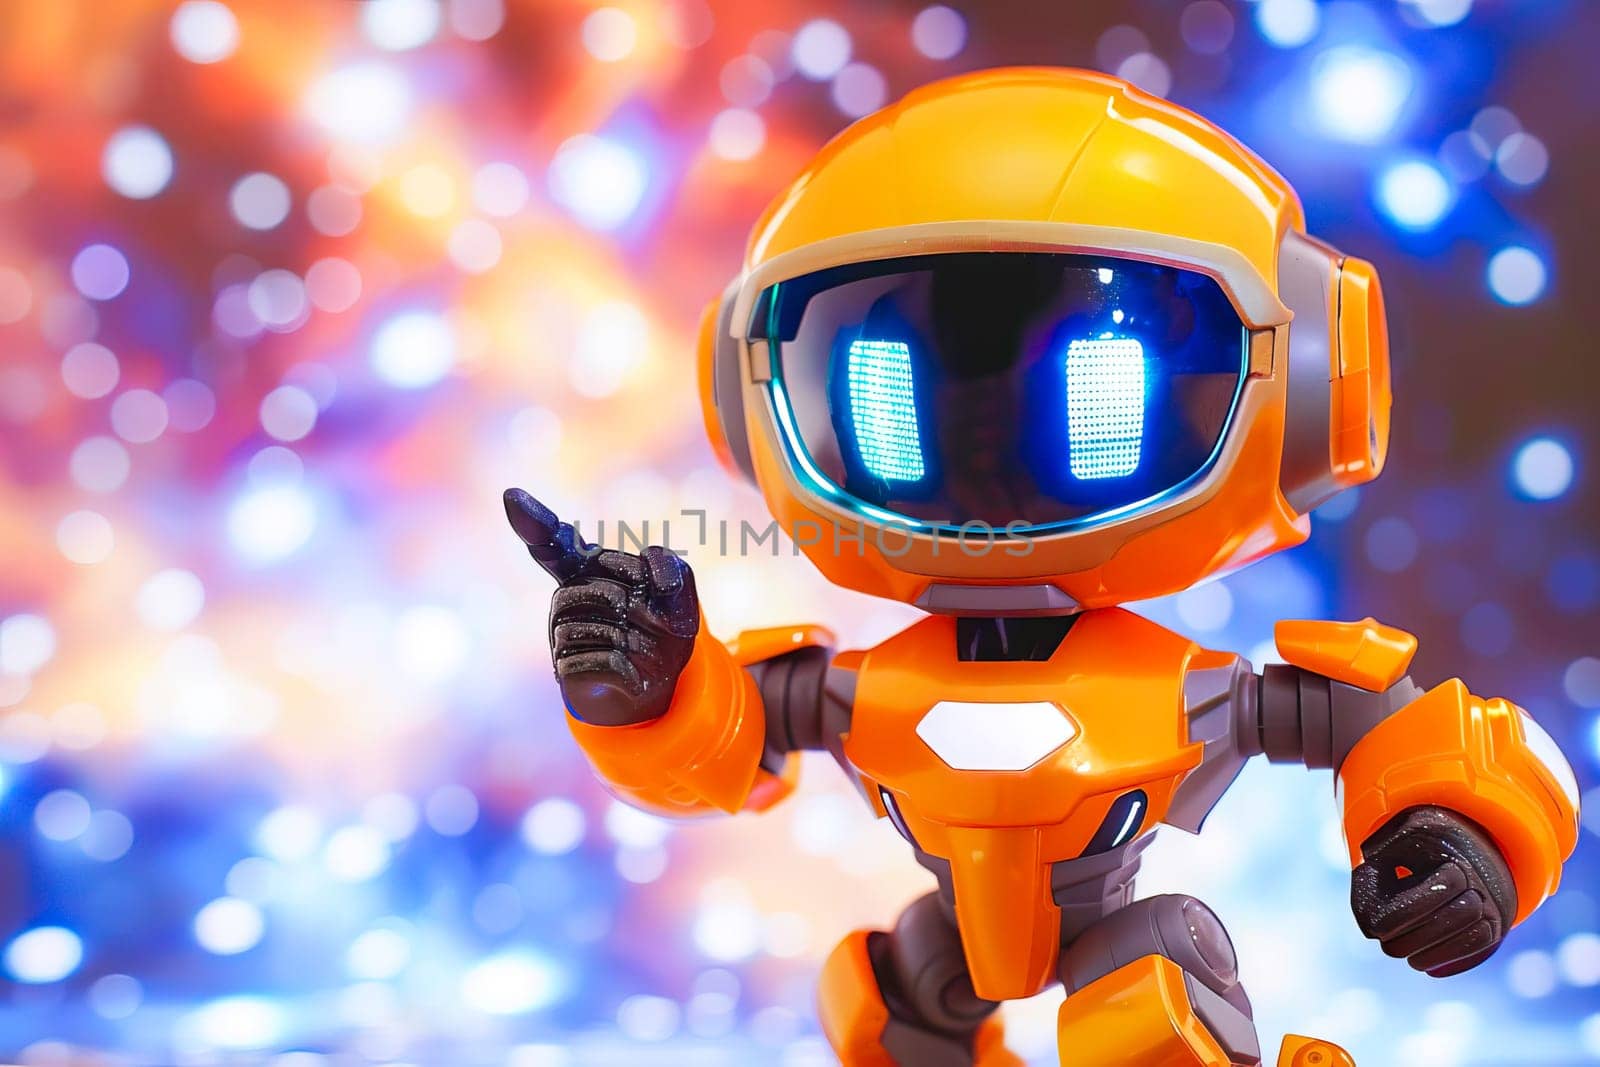 A toy robot with glowing blue eyes and a yellow helmet, pointing in a playful manner. by vladimka